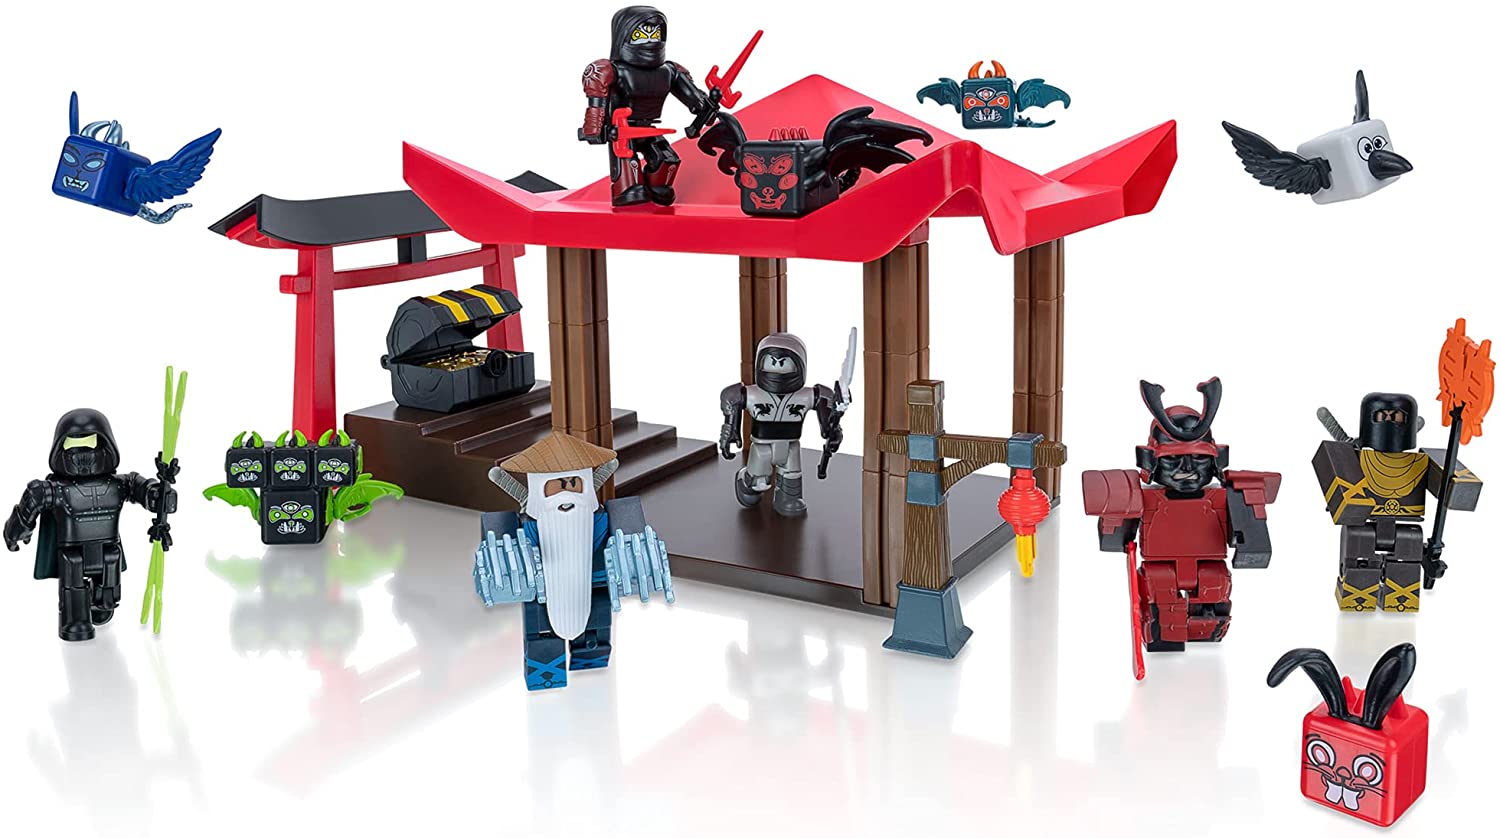 Roblox Action Collection - Ninja Legends Deluxe Playset w/ Exclusive Virtual Item $16.79 + Free Shipping w/ Prime or on $25+